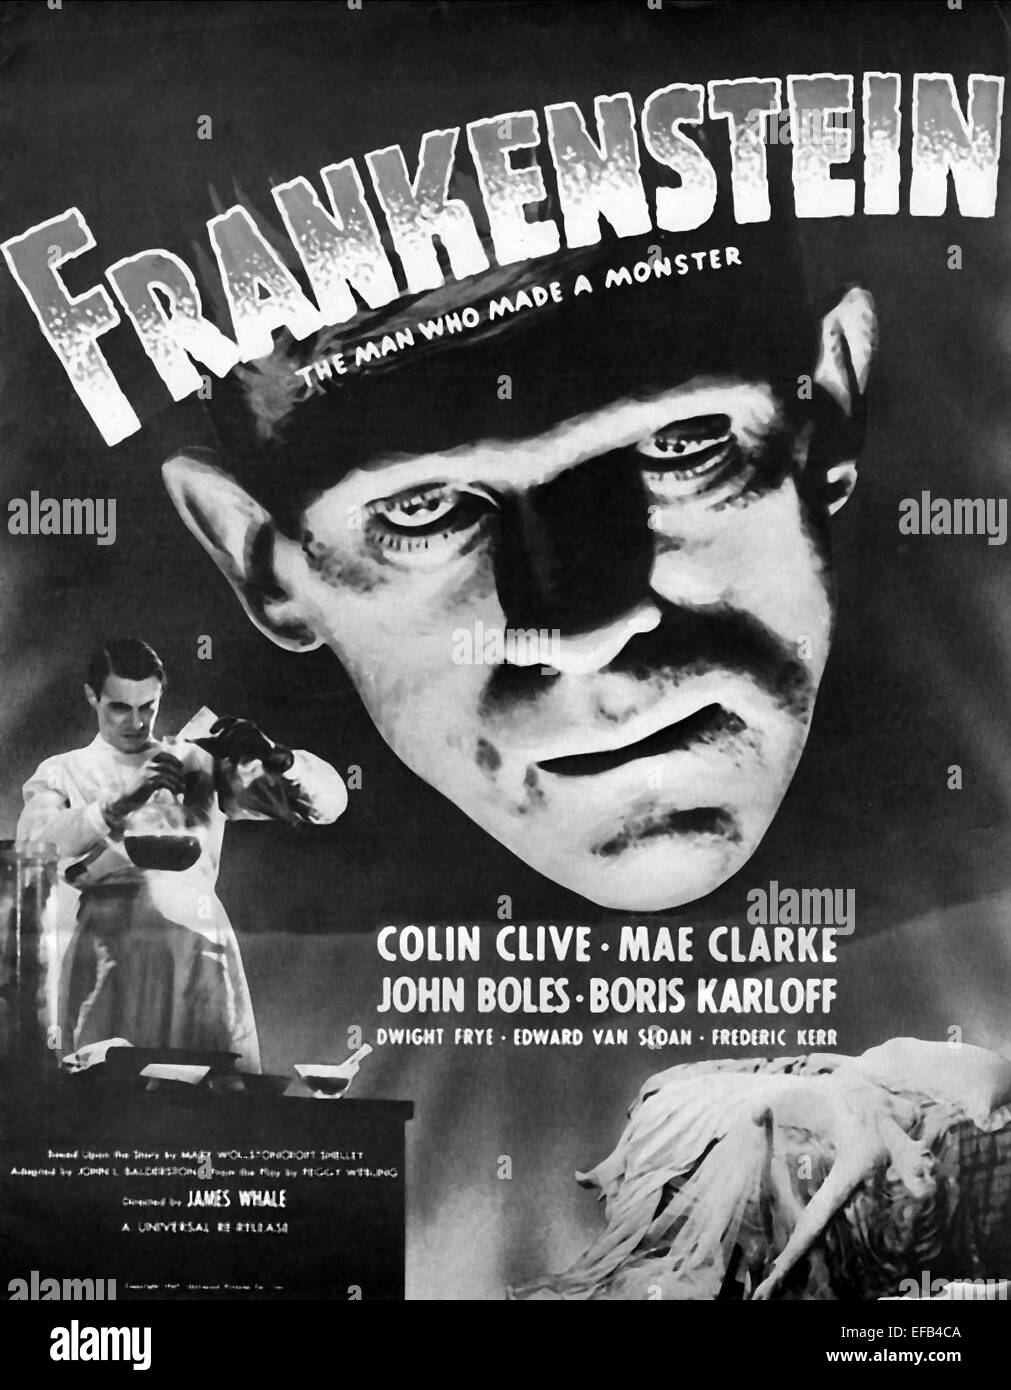 Frankenstein 1931 poster Black and White Stock Photos & Images - Alamy